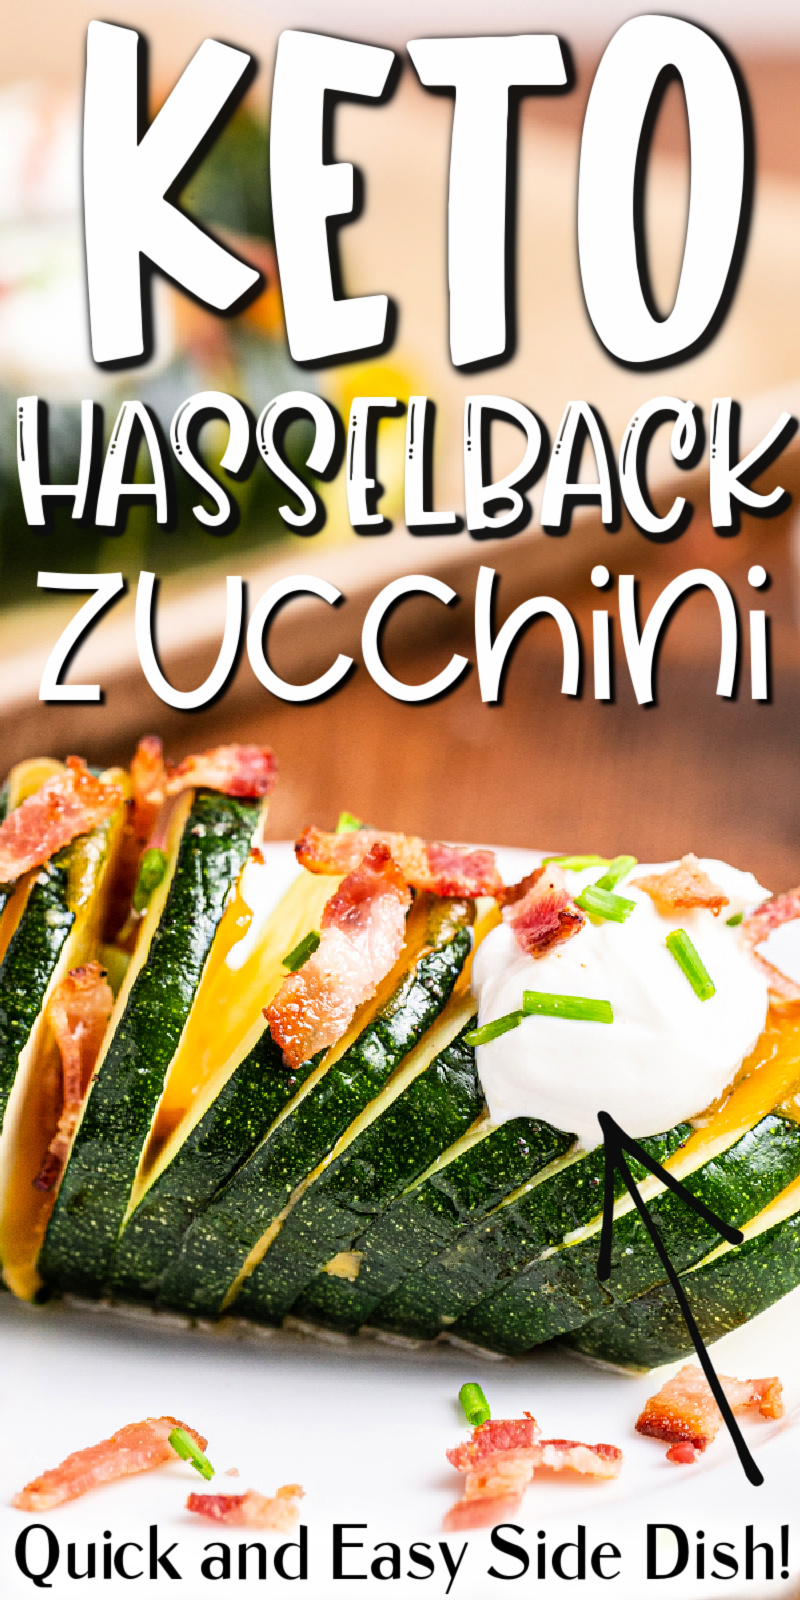 Hasselback Zucchini - This loaded Hasselback zucchini recipe is an easy-to-make low carb, keto, and gluten-free side dish that everyone will love! #keto #lowcarb #glutenfree #loaded #hasselback #zucchini #recipe